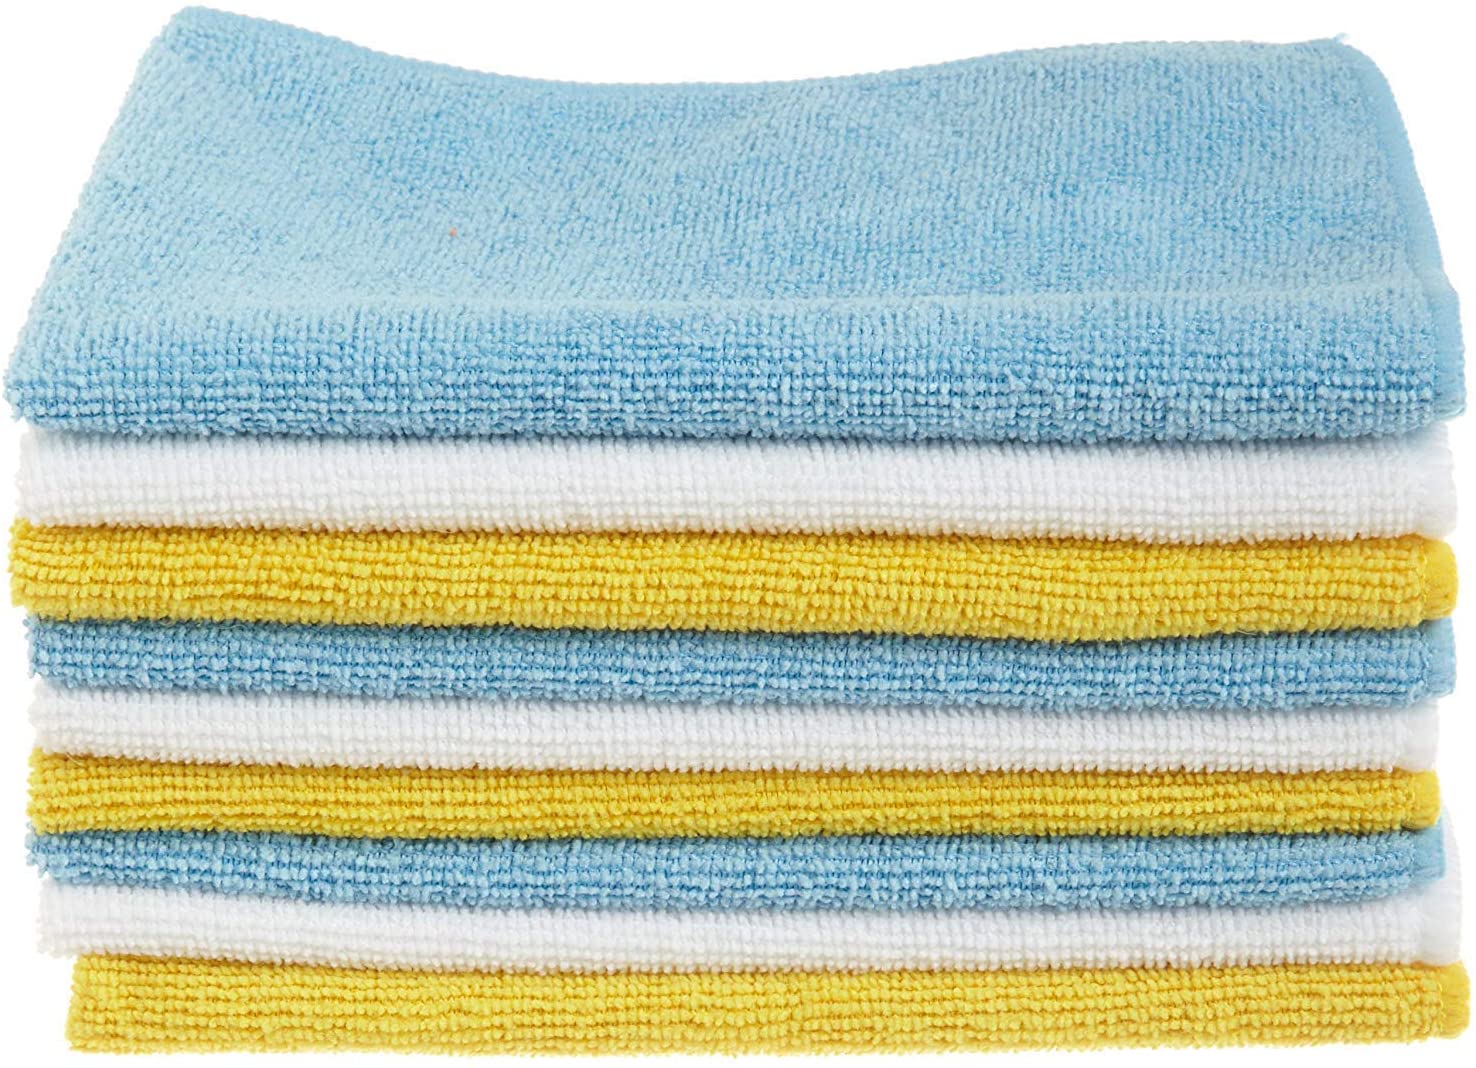 Amazon Basics Absorbent Microfiber Cleaning Cloths, 24-Pack